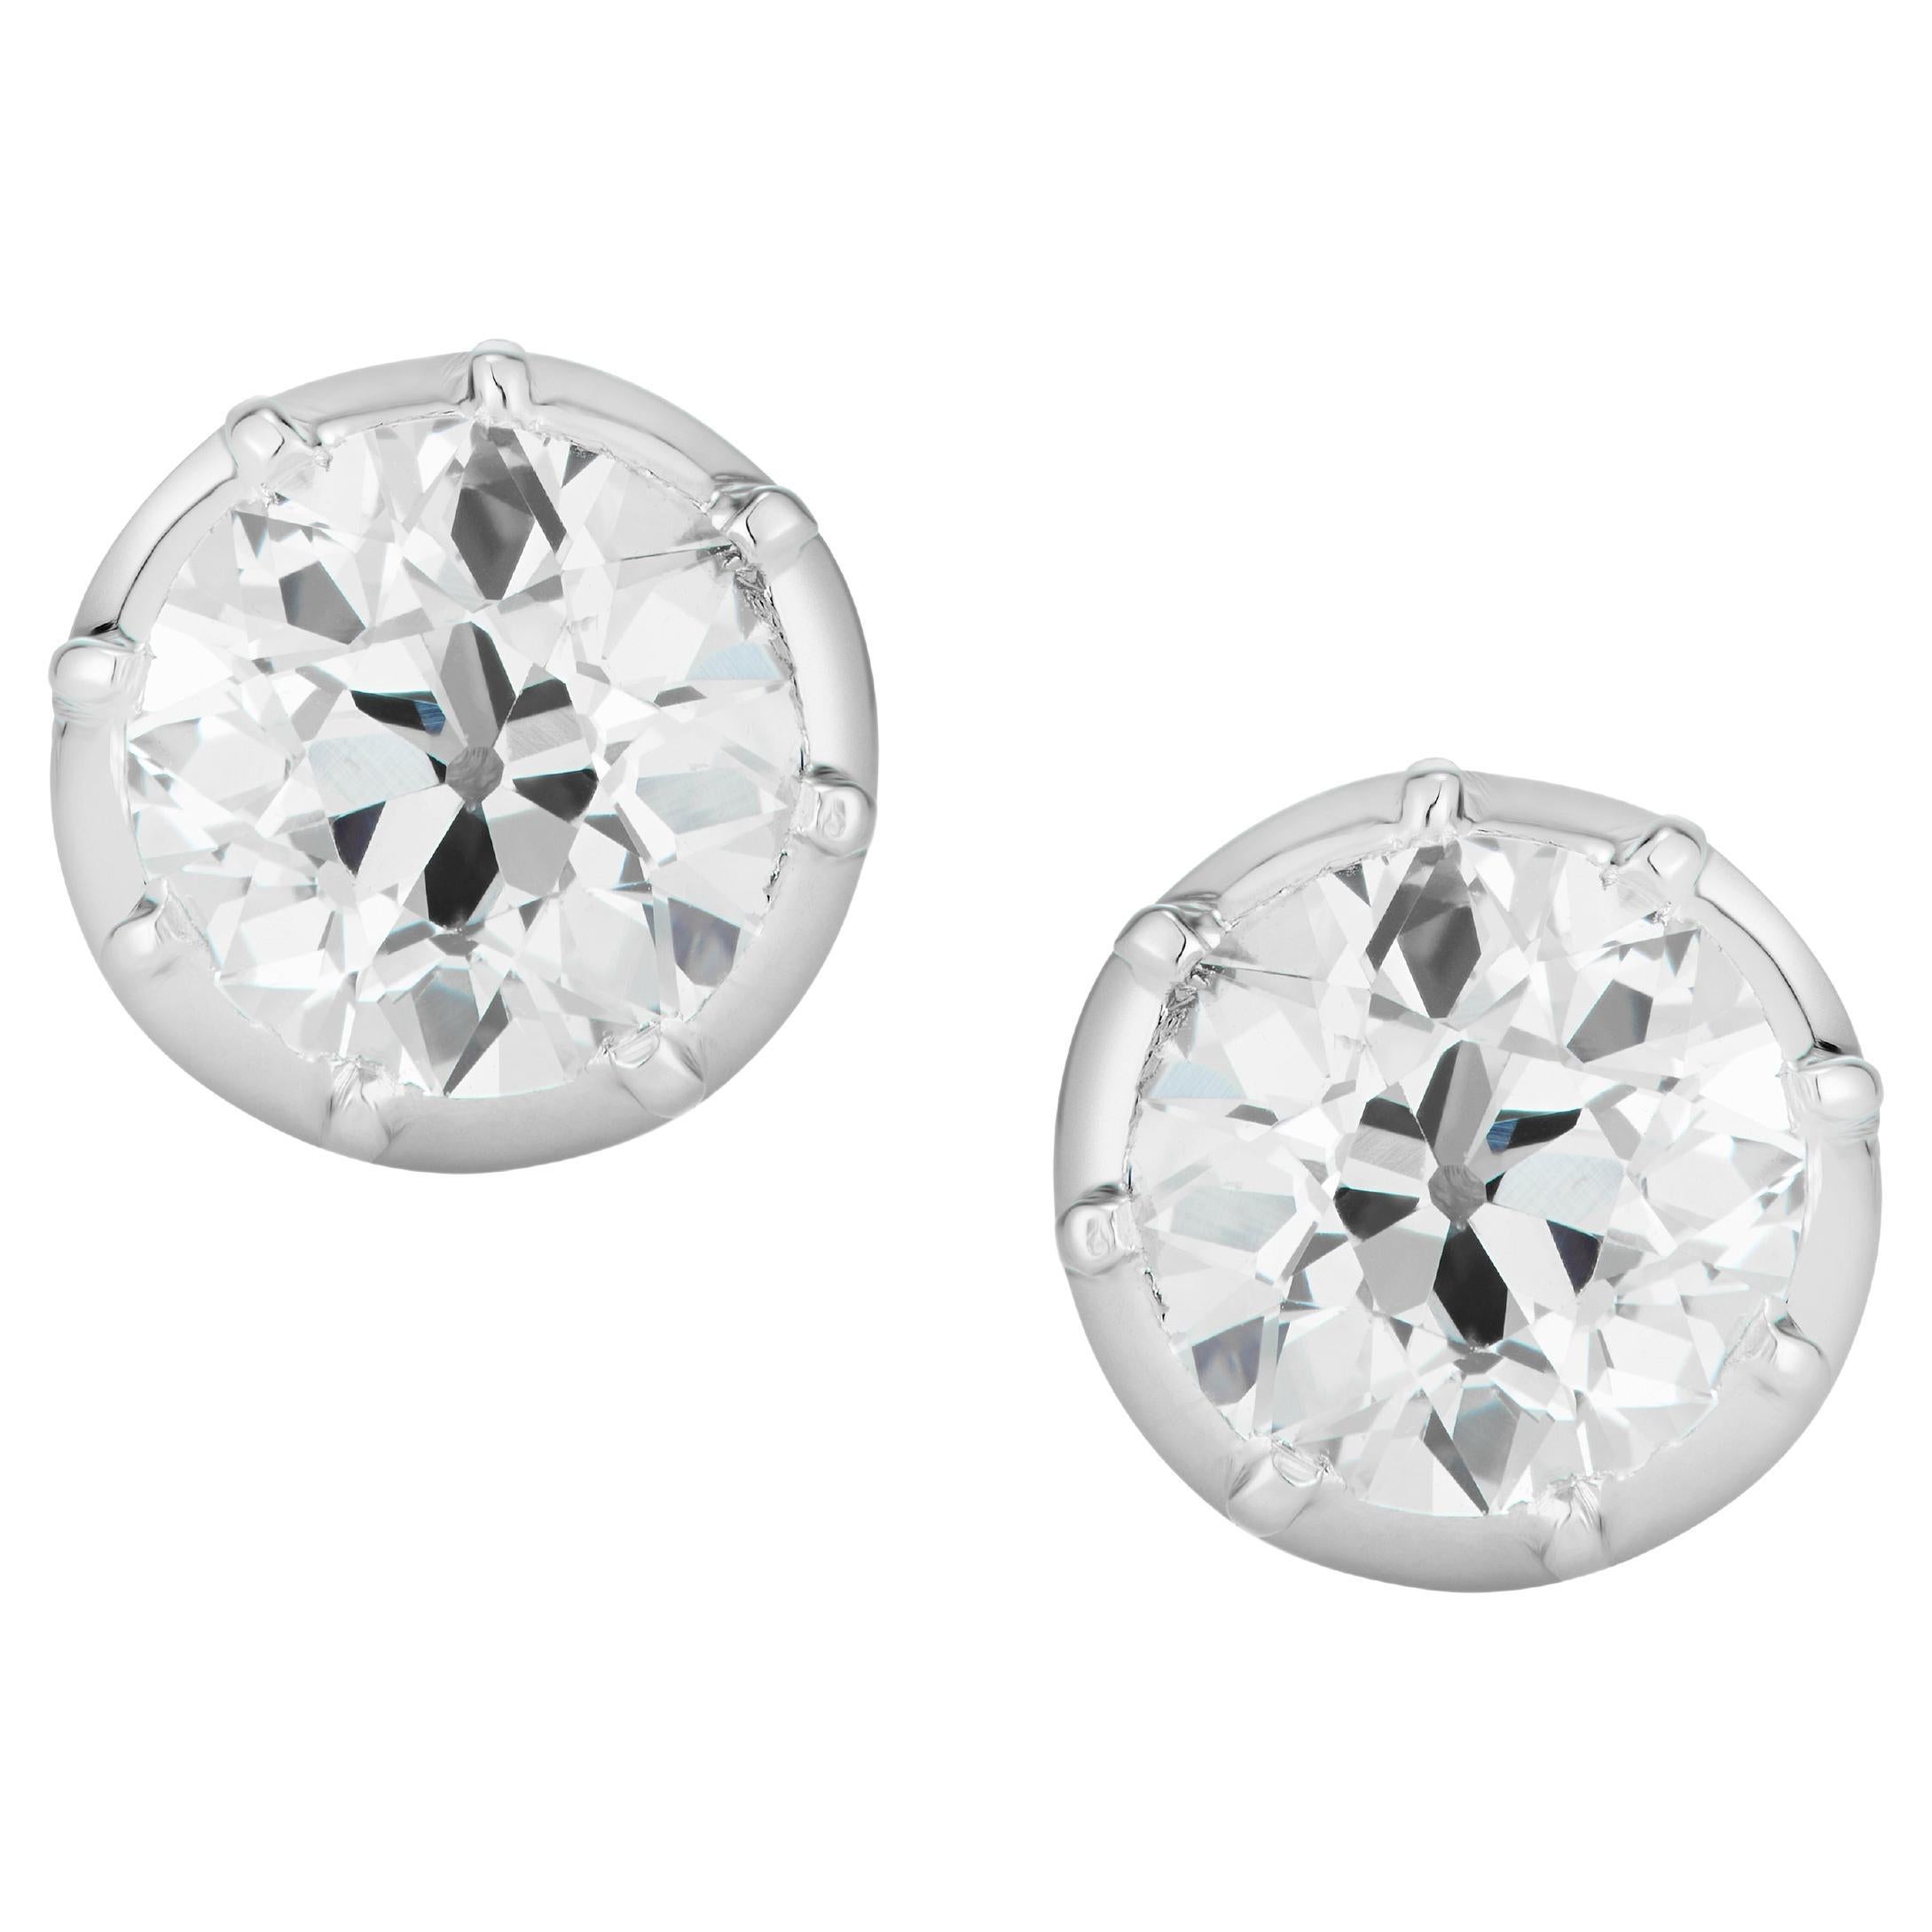 1 Carat Old Cut Diamond Studs in Gold and Platinum in Cut Down Setting